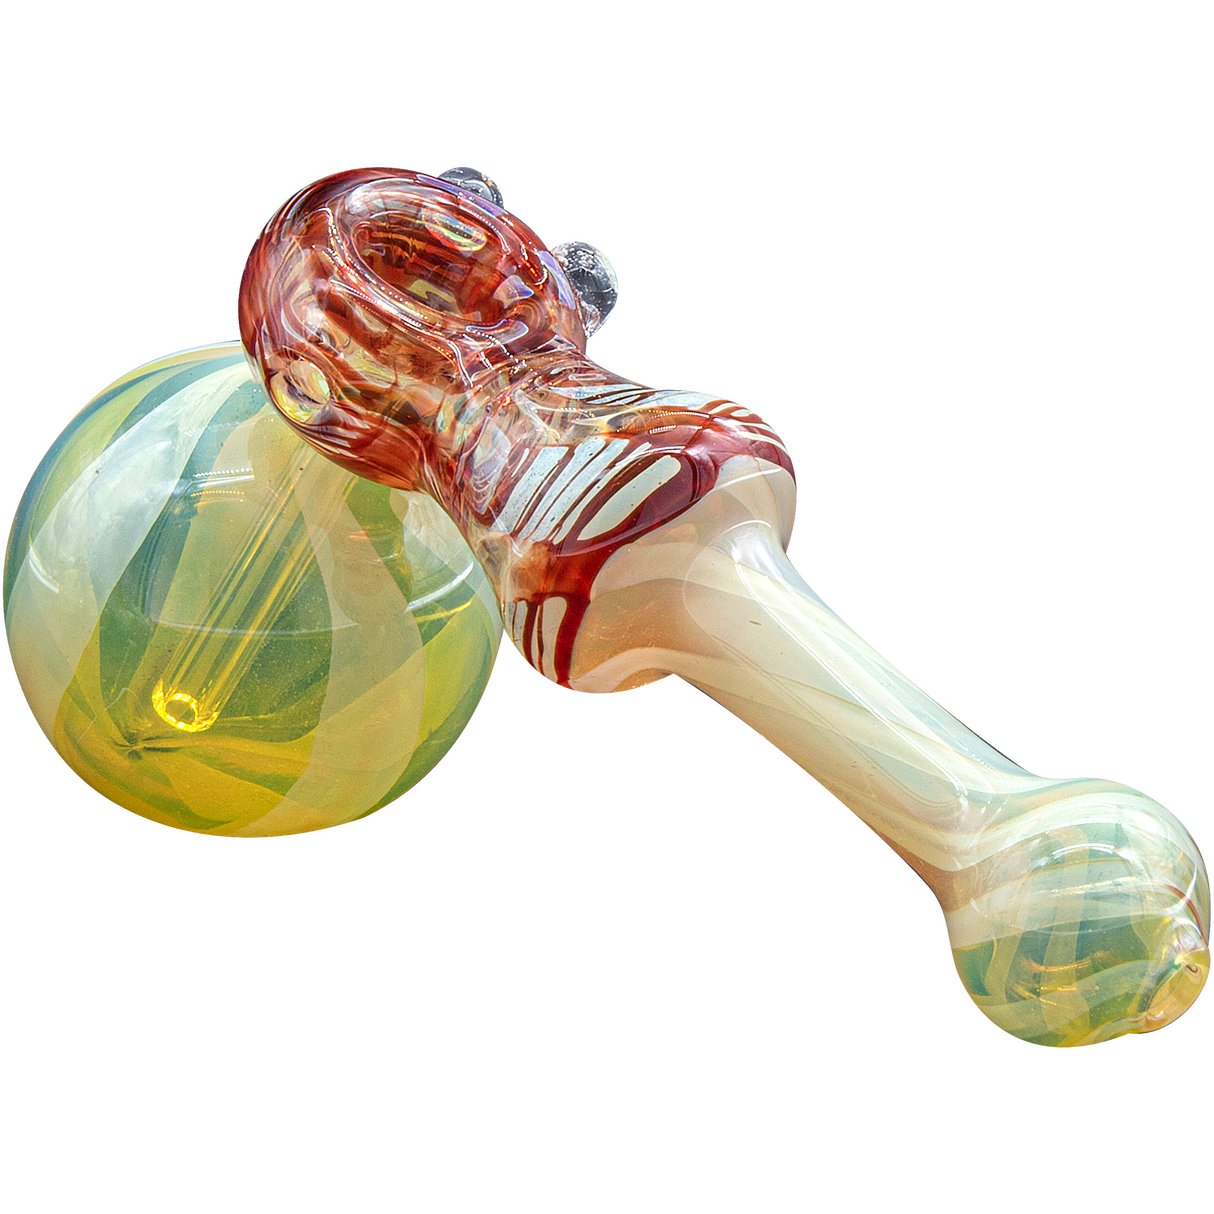 LA Pipes Raked Hammer Fumed Bubbler Pipe in Yellow & Red, Side View on White Background